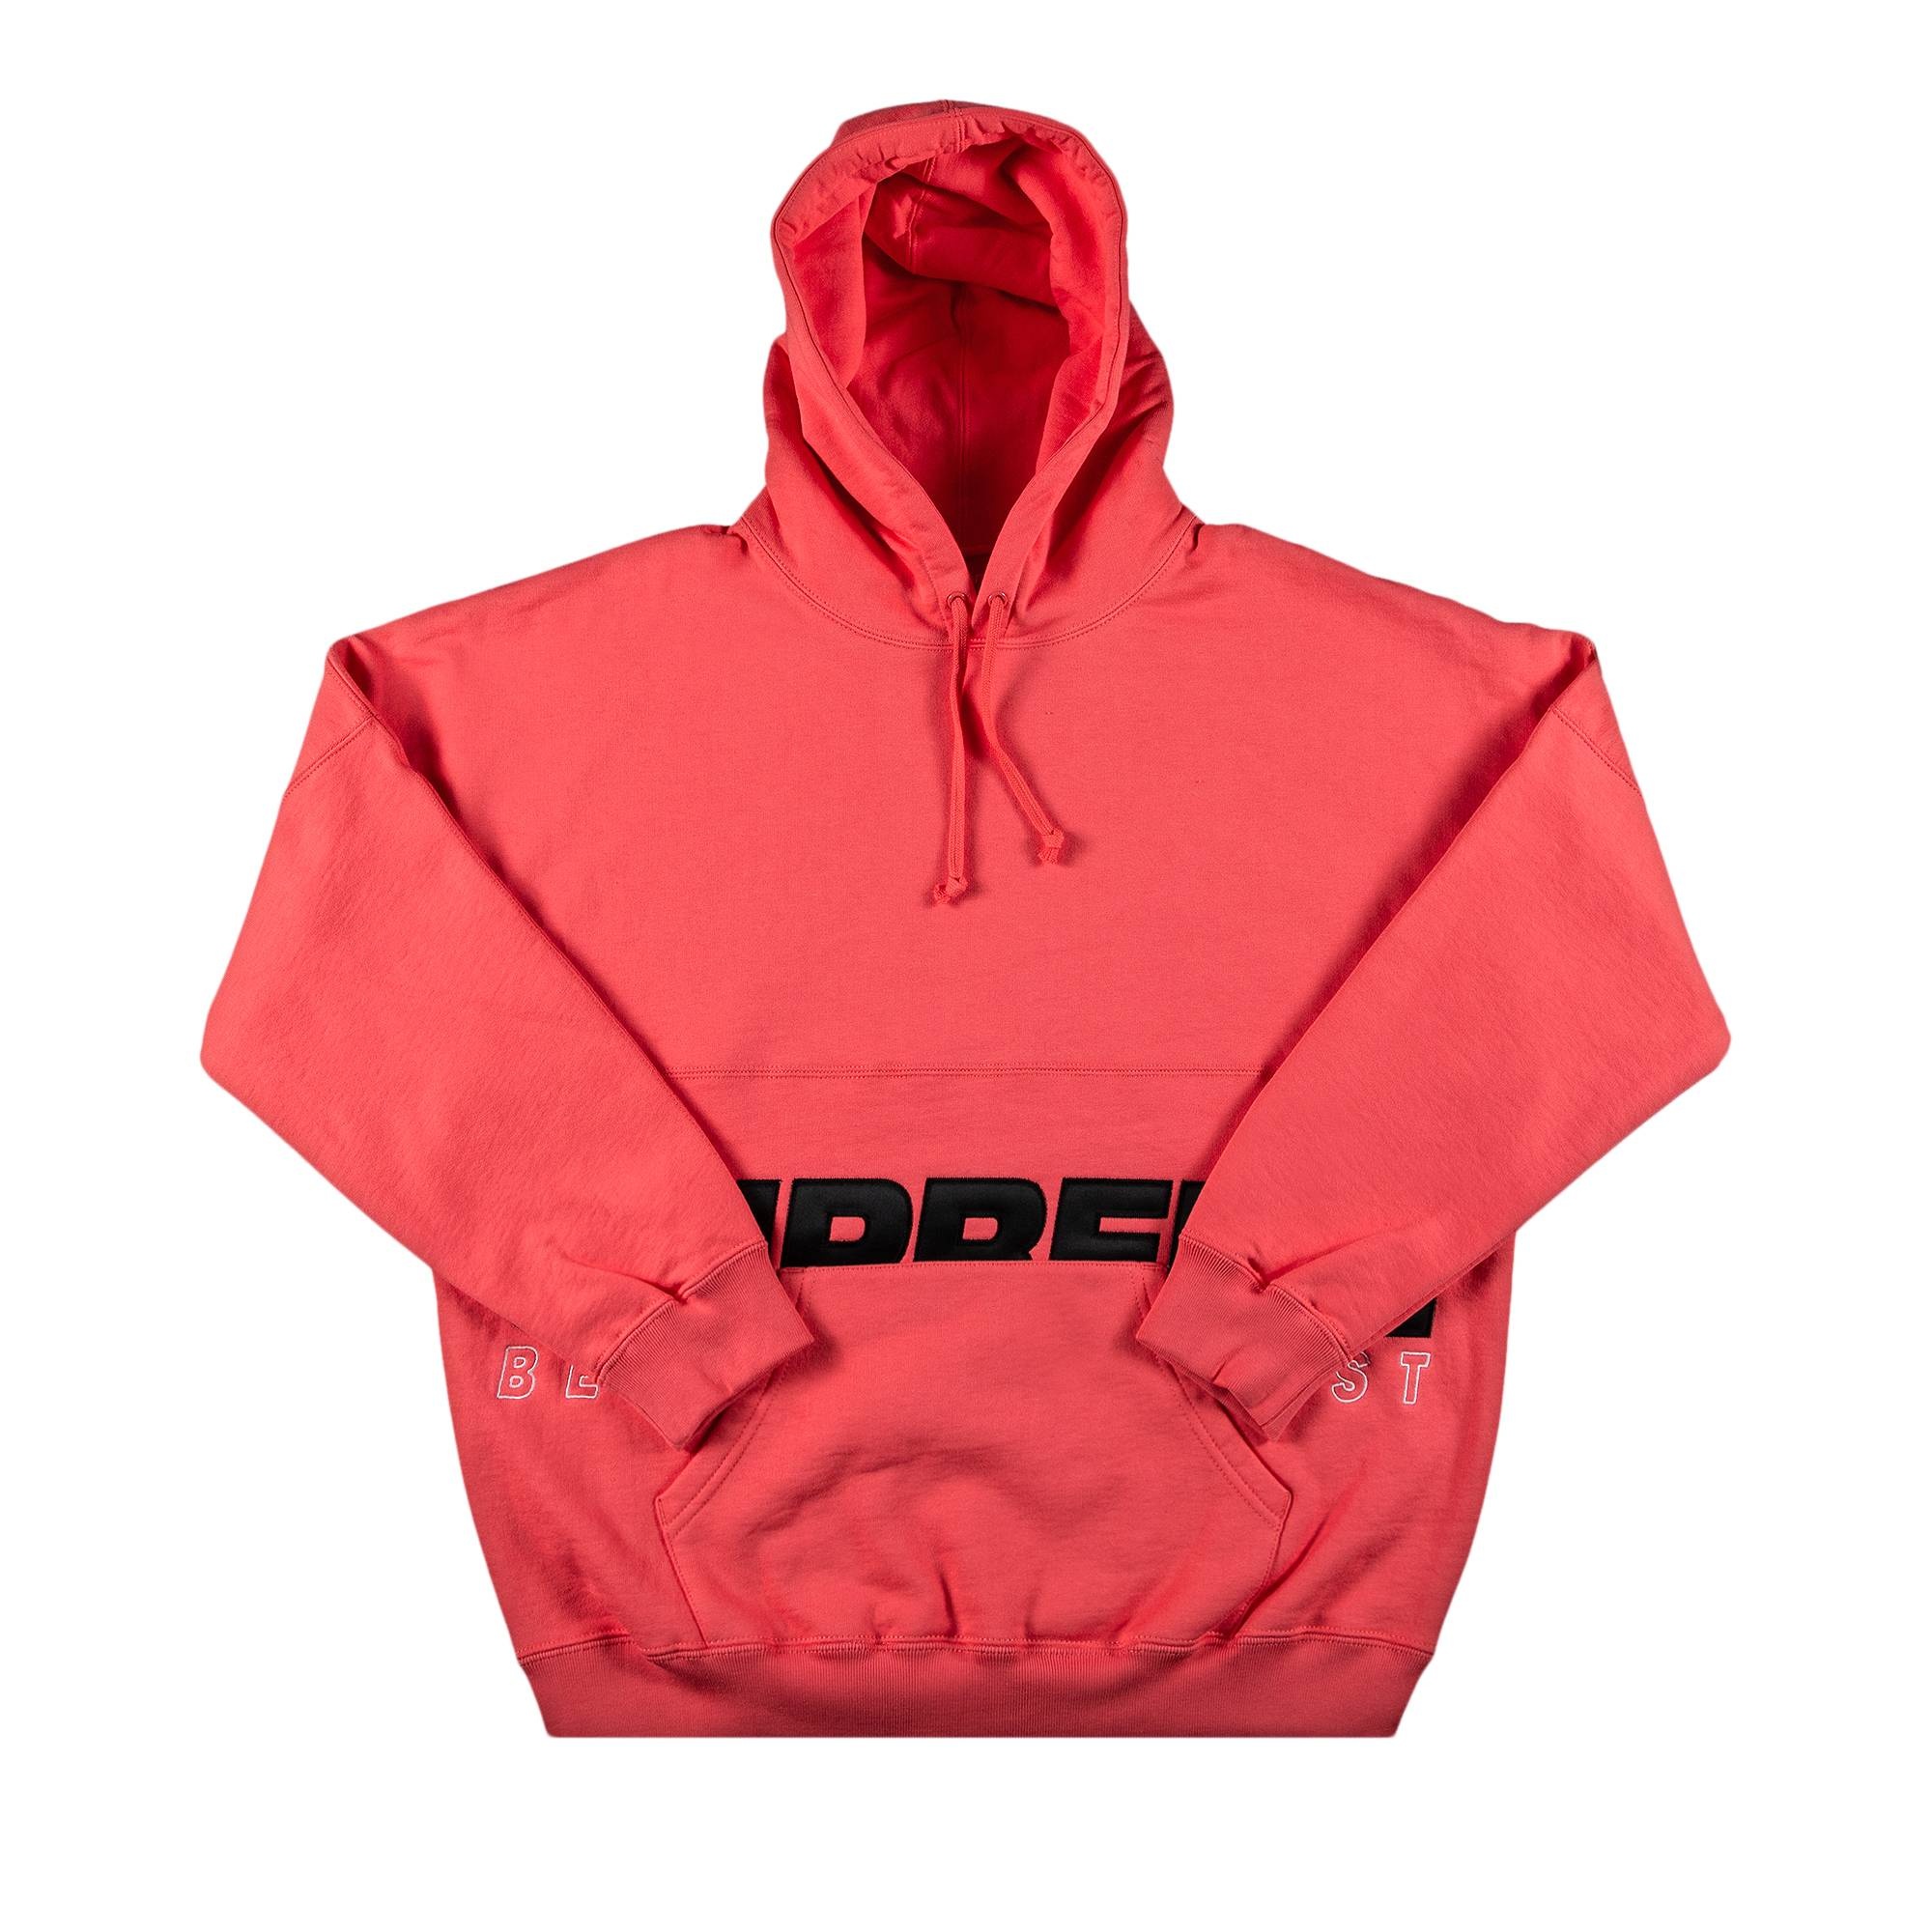 Supreme Best Of The Best Hooded Sweatshirt 'Bright Coral' - 1